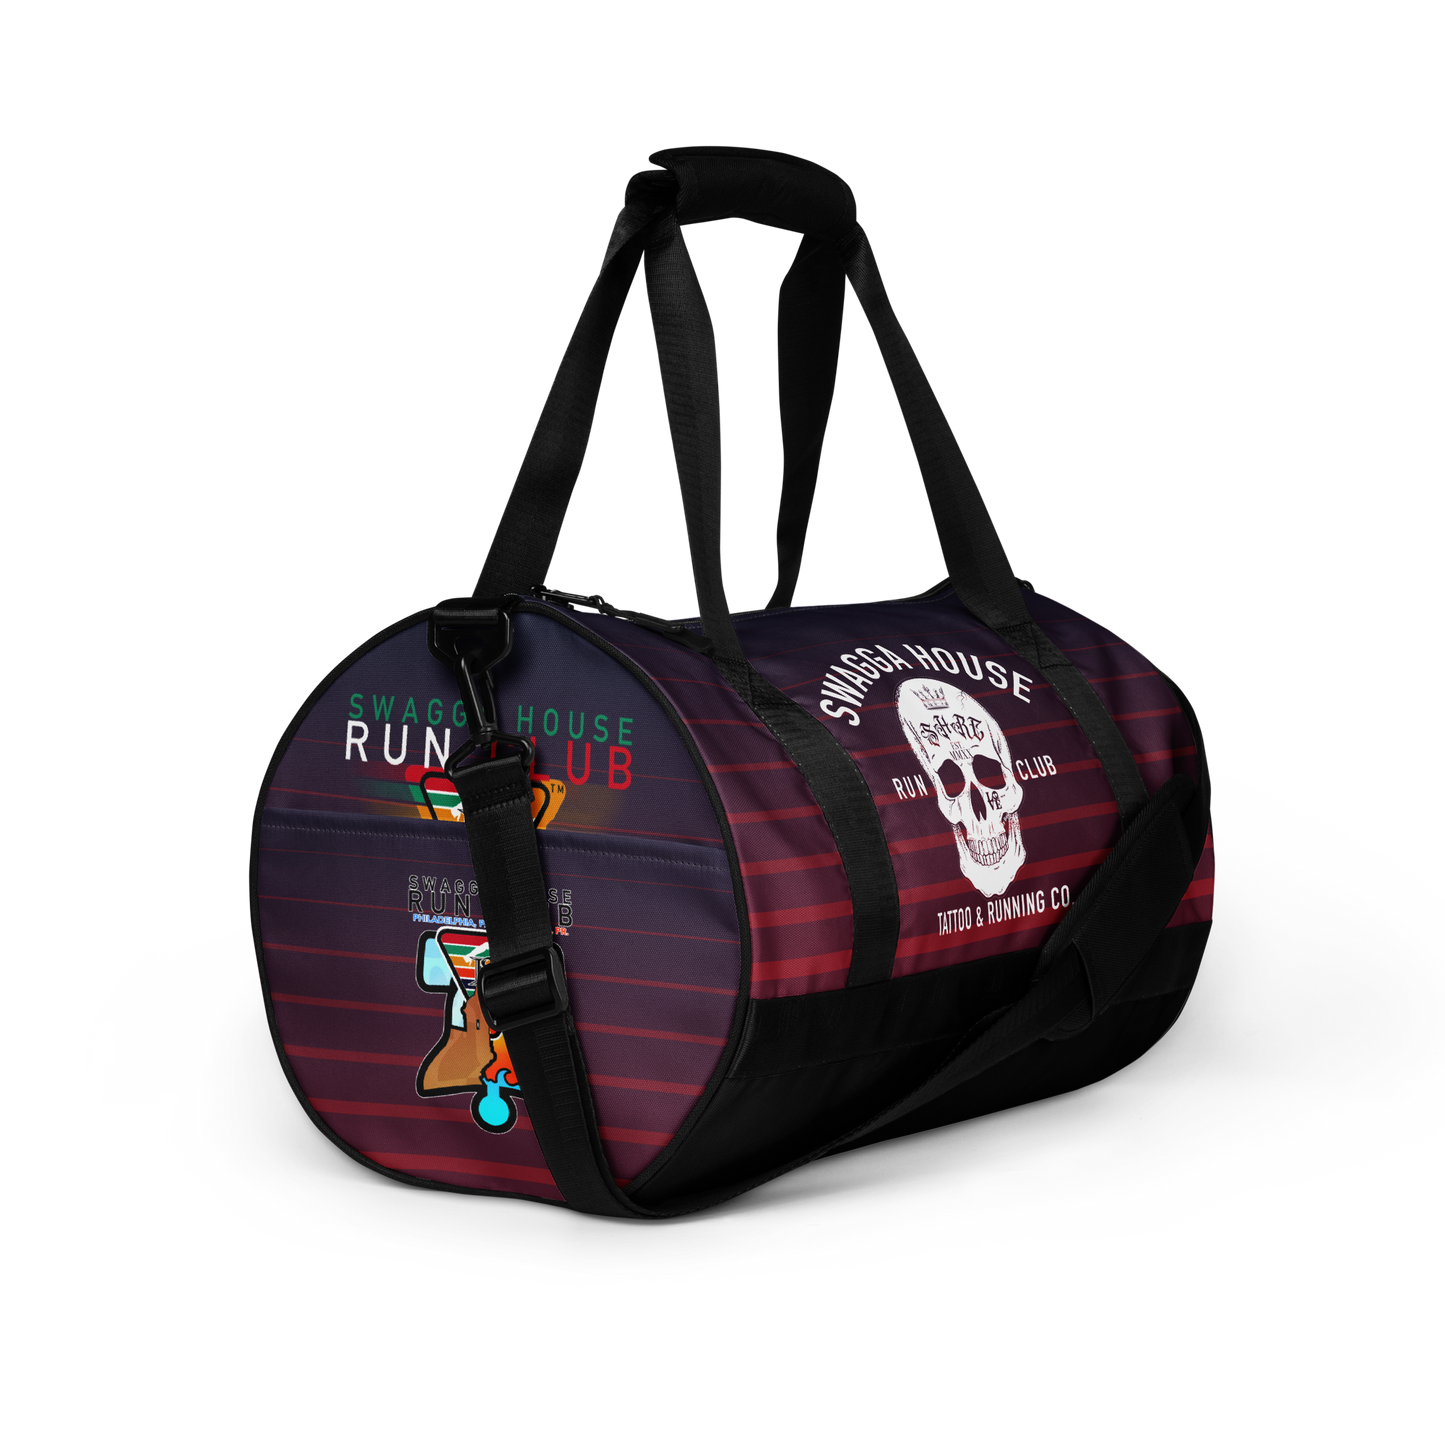 Tattoo and run club X Philly to San Juan gym bag  (limited)